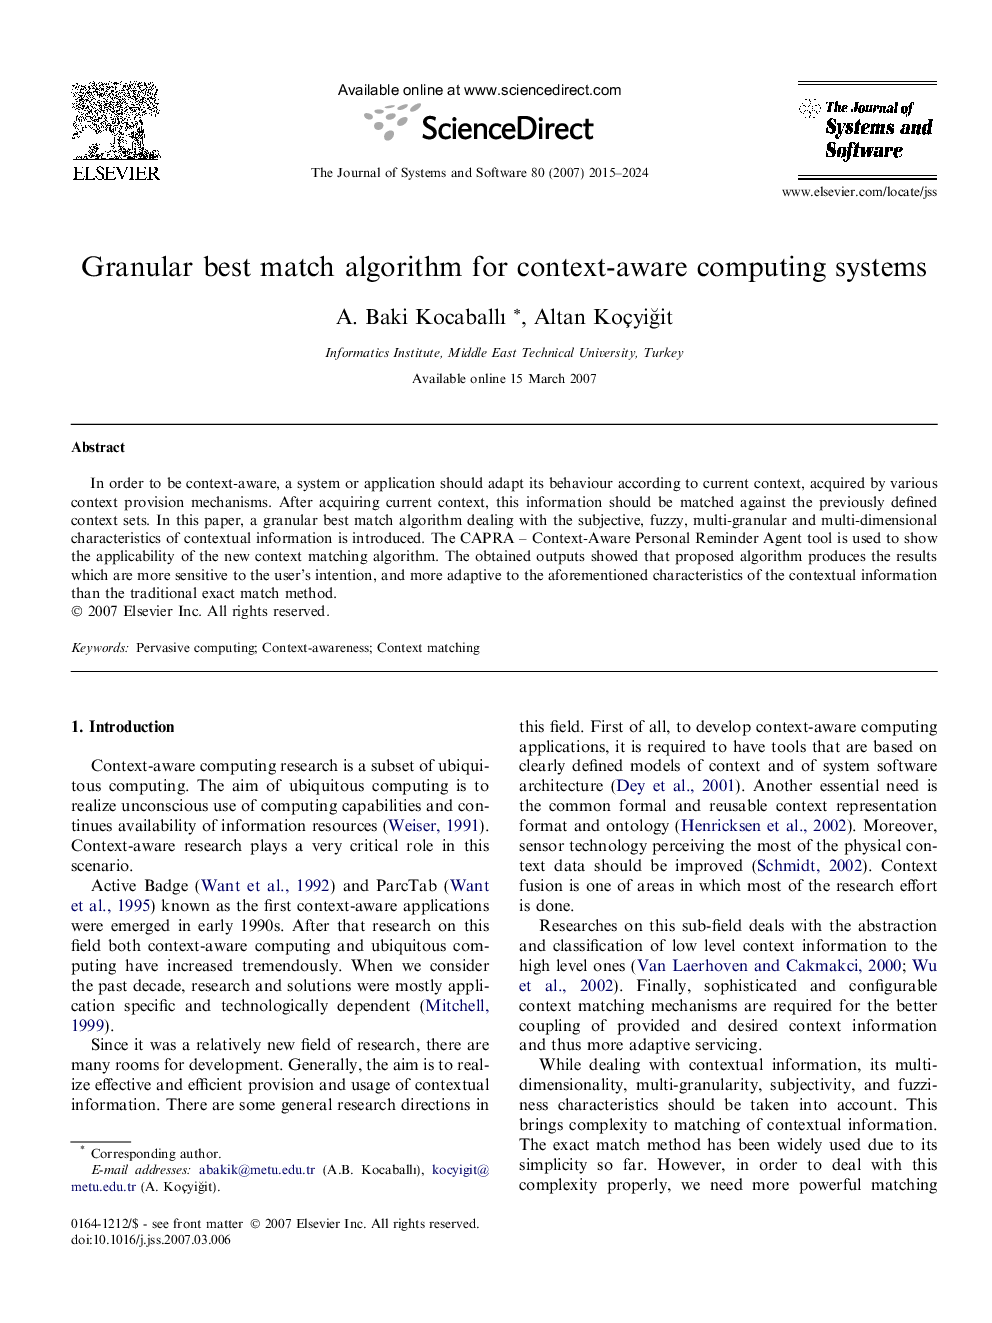 Granular best match algorithm for context-aware computing systems